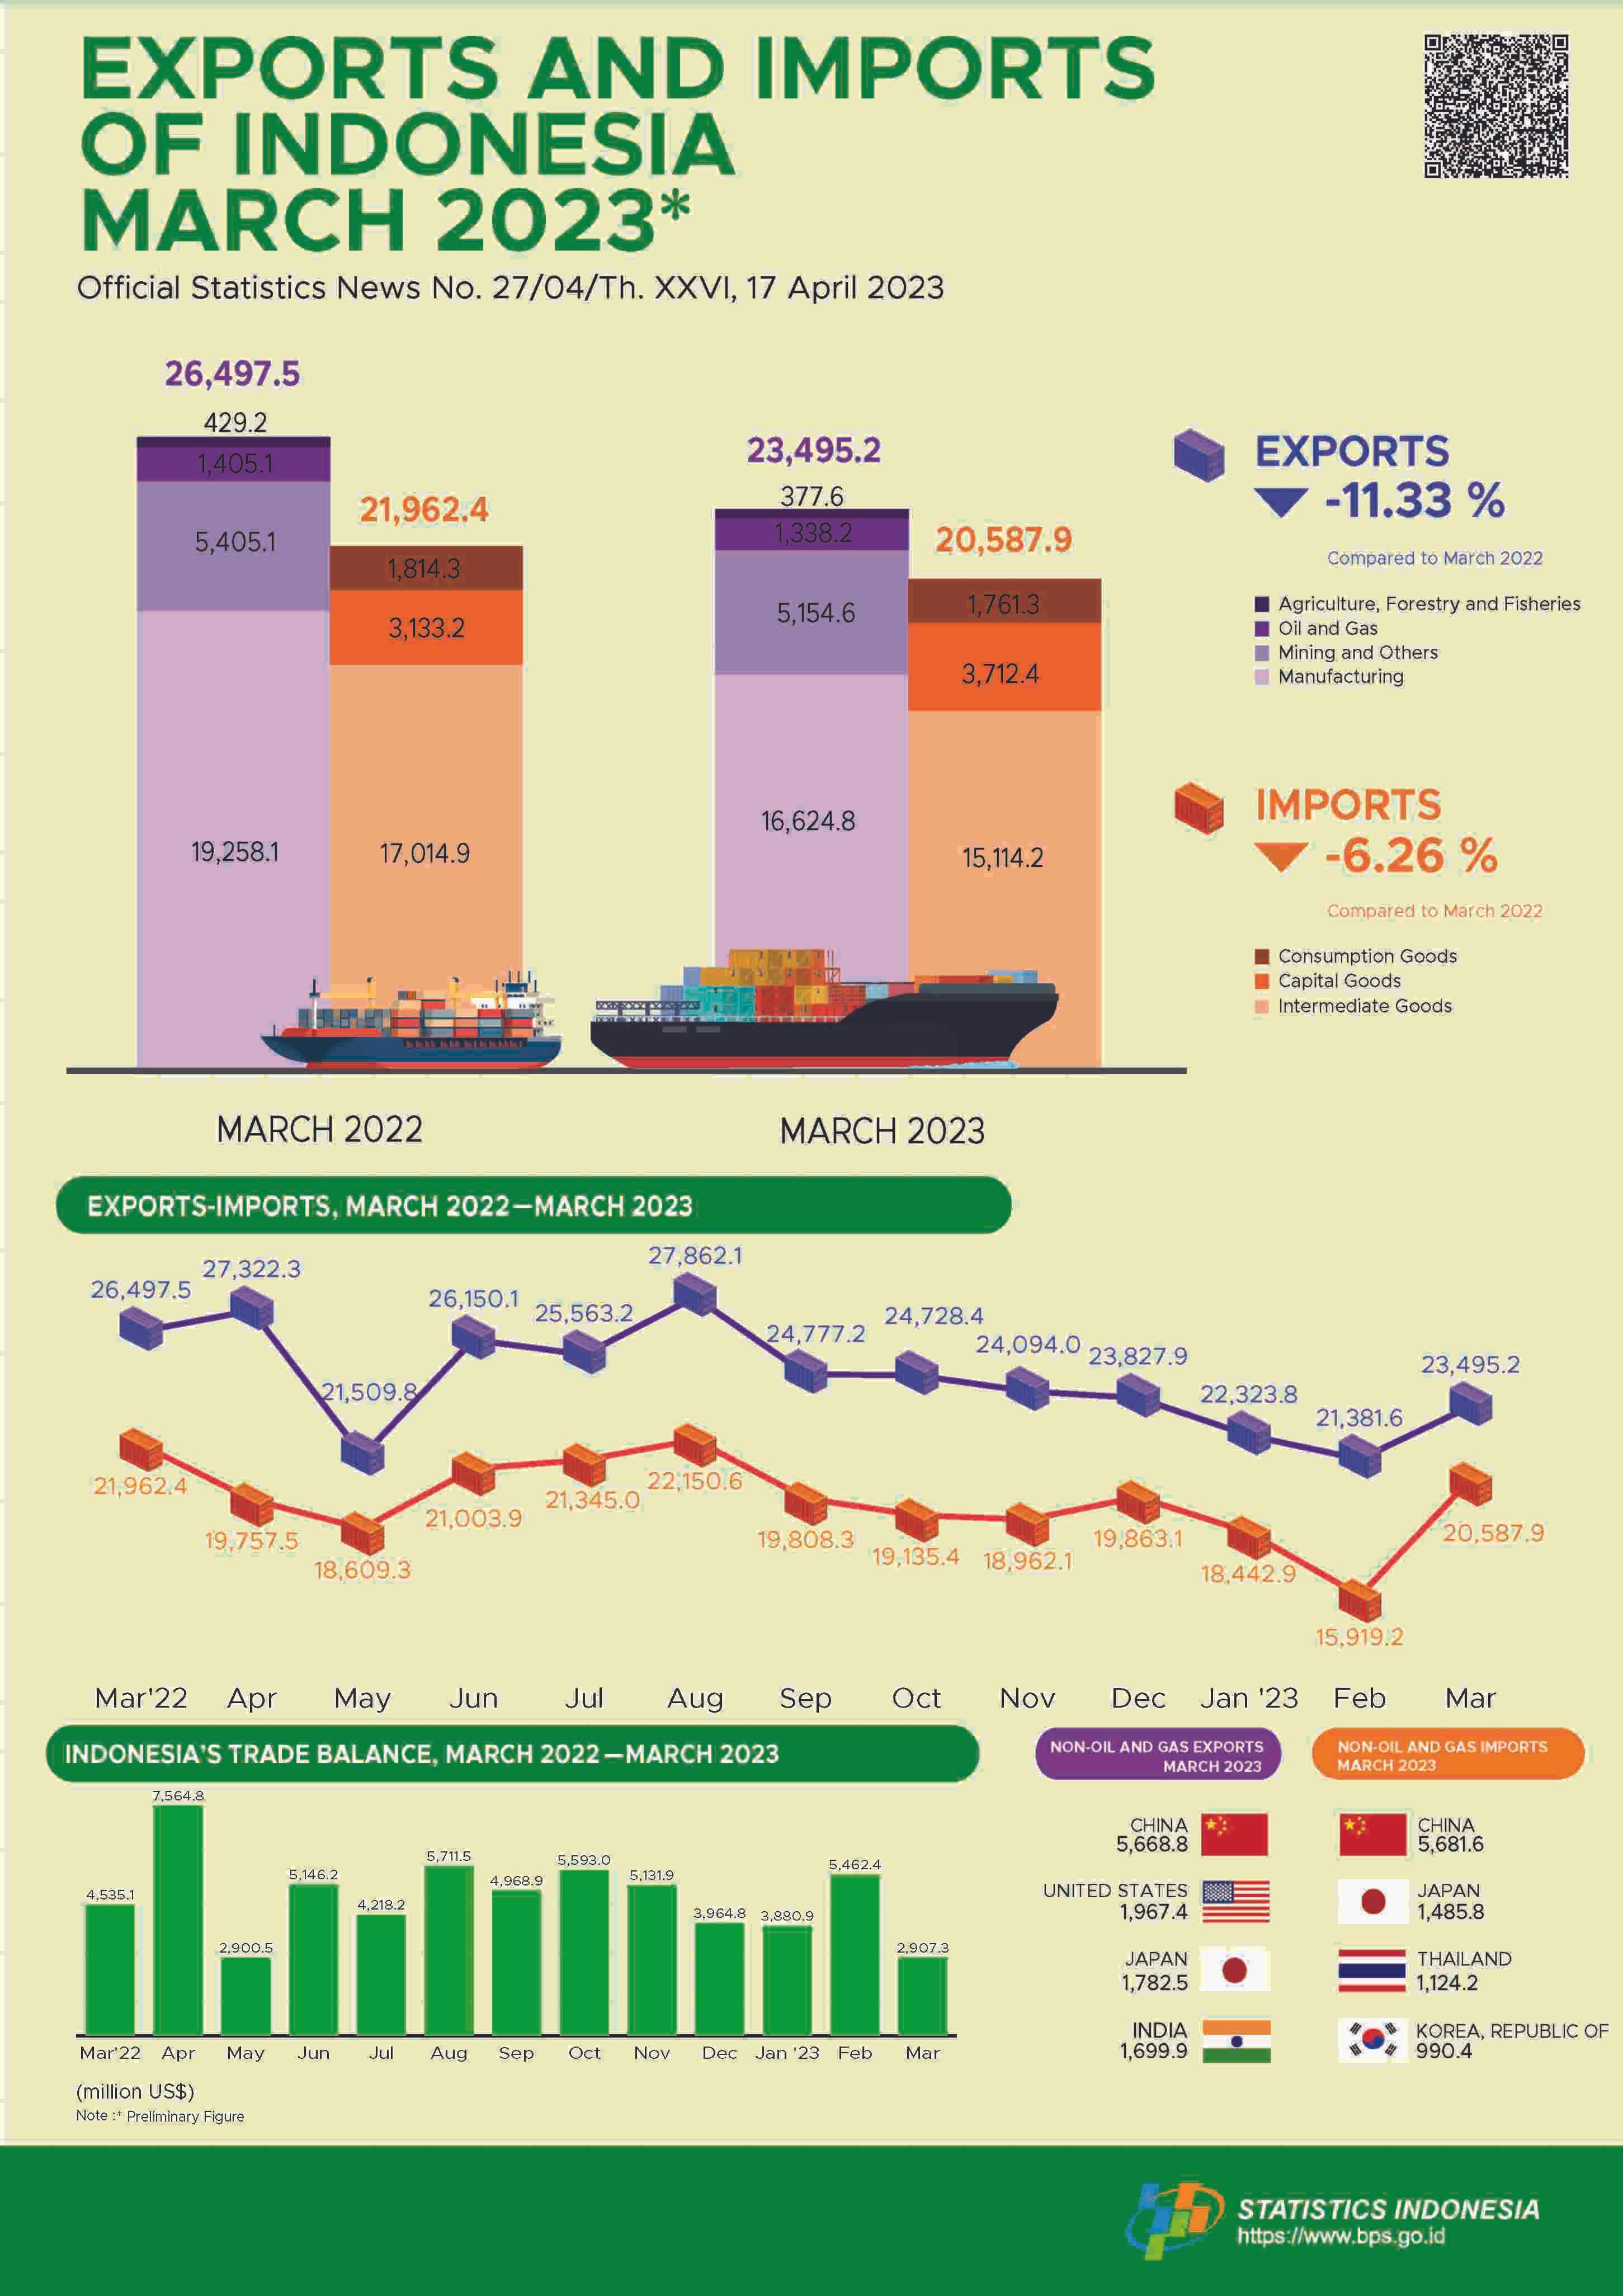 Exports in March 2023 reached US$23.50 billion and Imports in March 2023 reached US$20.59 billion